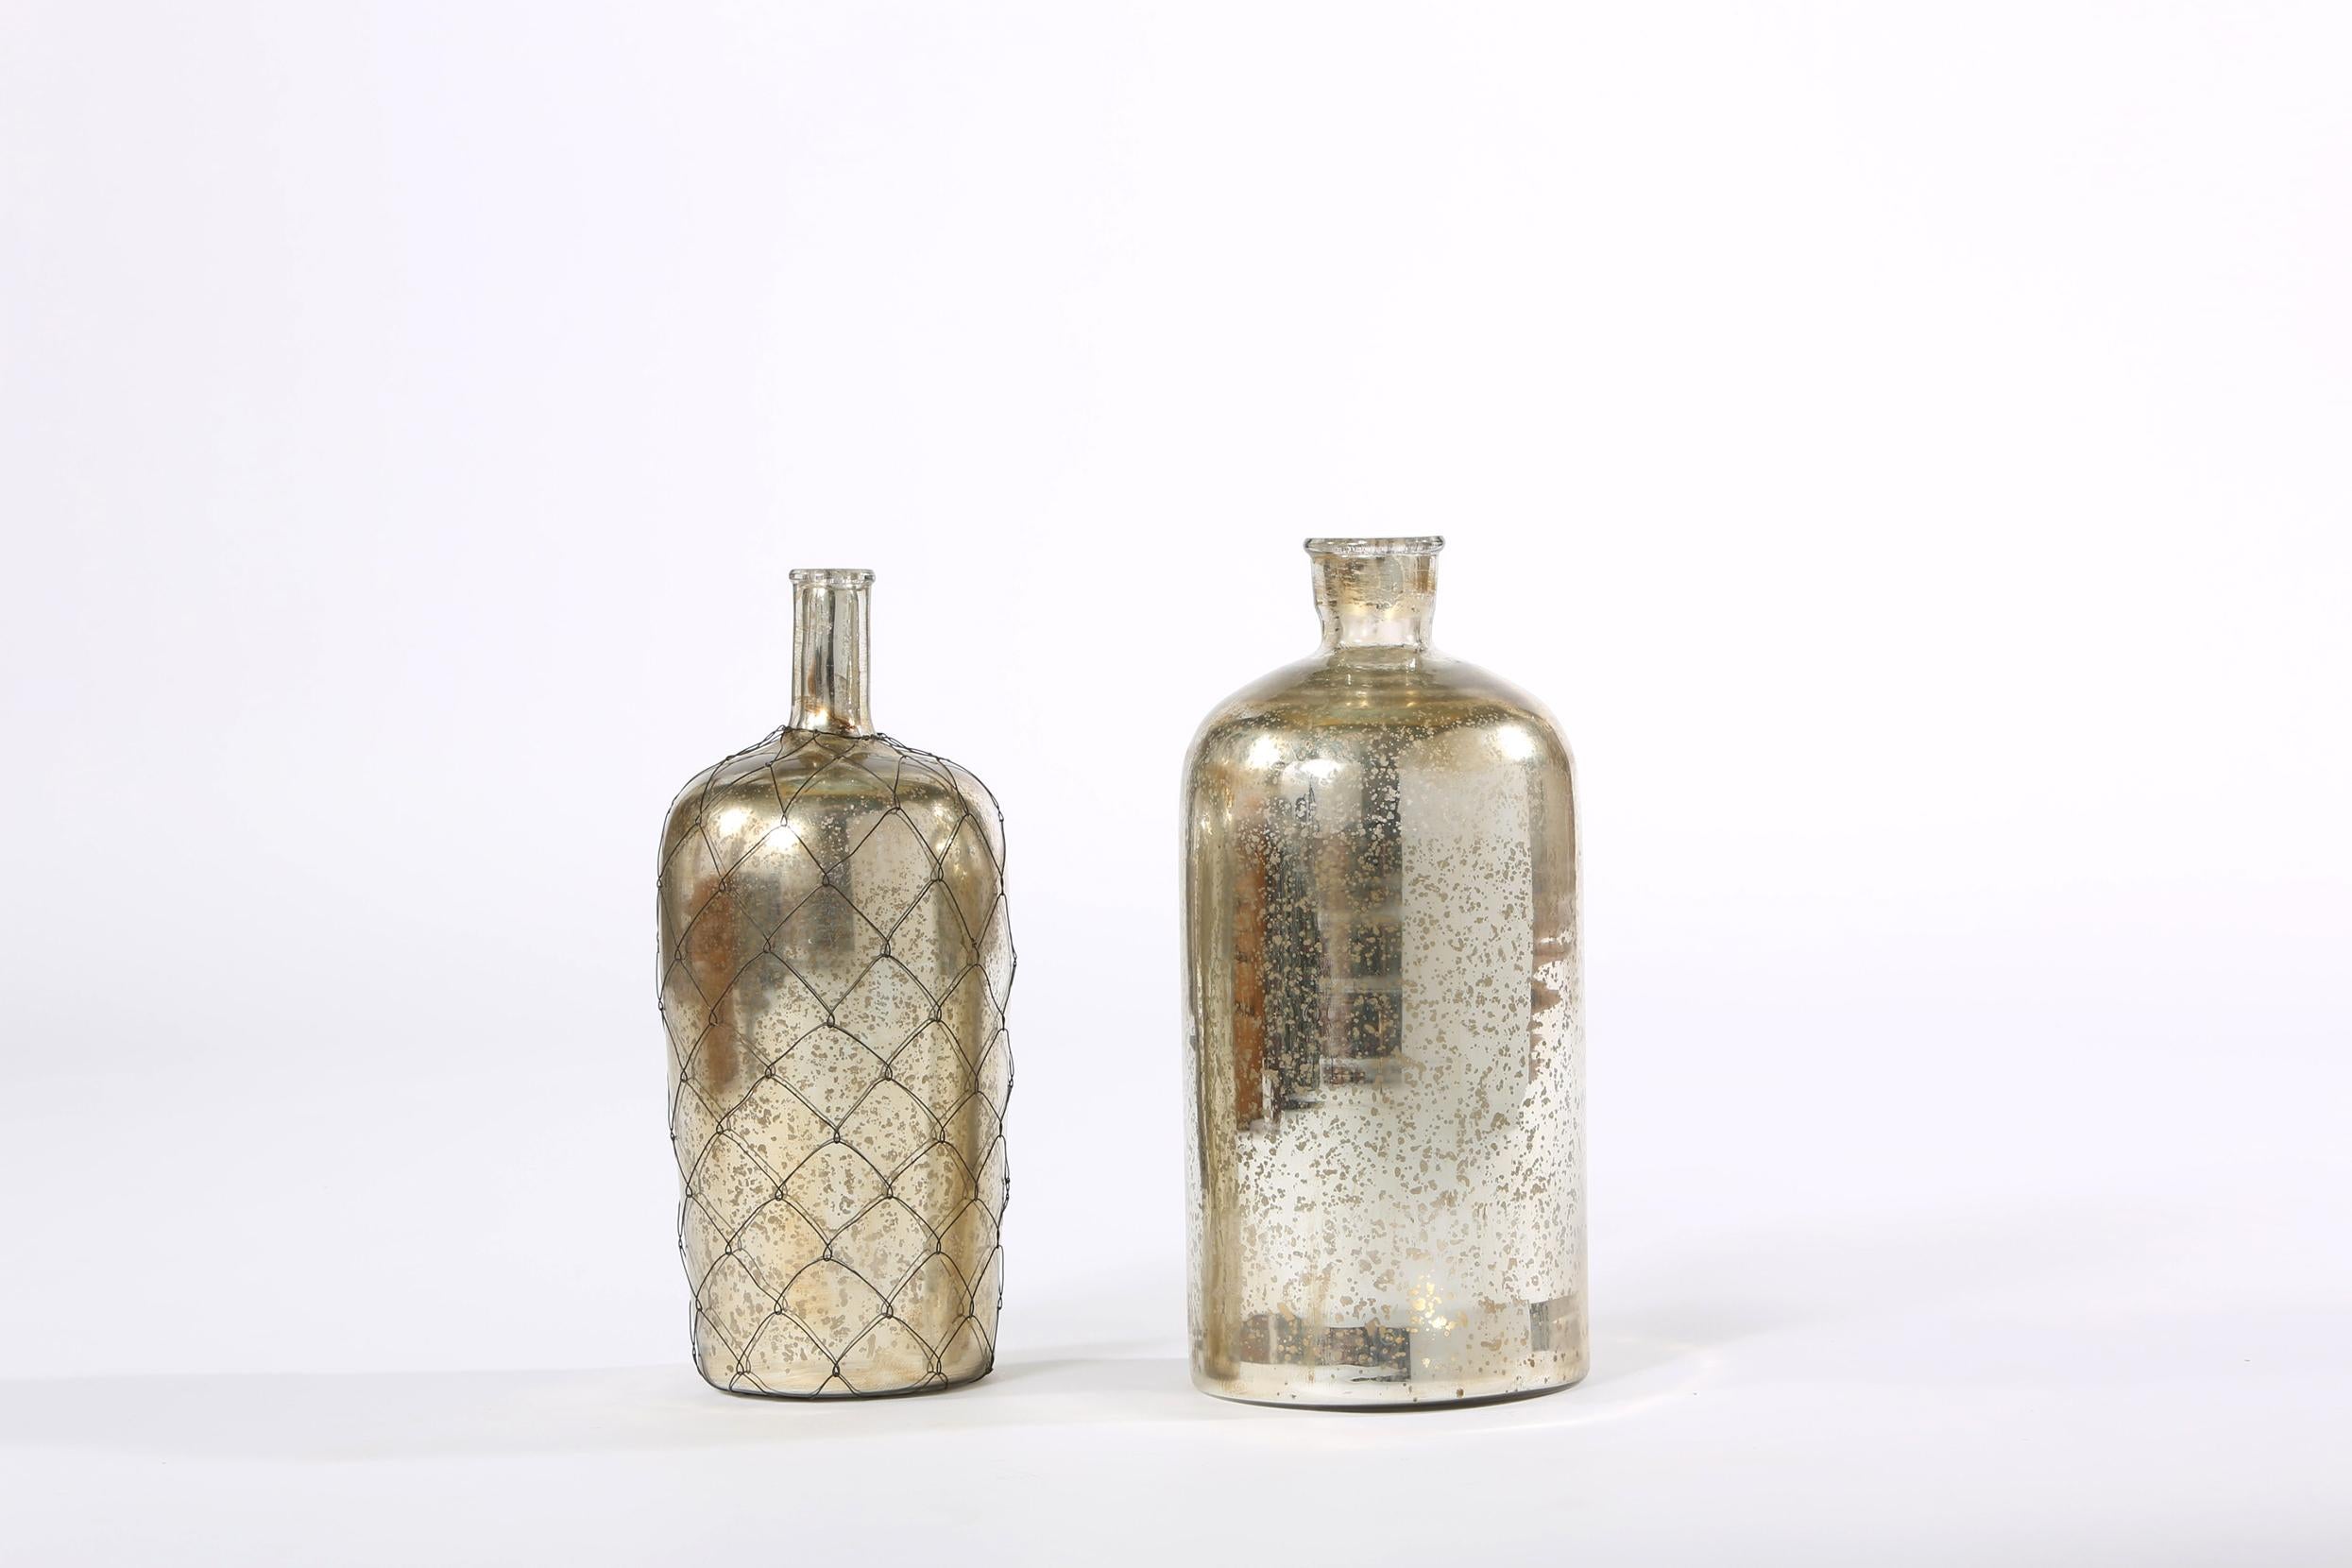 Pair of late 20th century mercury glass decorative bottles piece. Each bottle is in good vintage condition. Minor wear appropriate with age / use. Tall one stand about 15 inches tall x 7 inches base diameter. The other bottle stand about 14.5 inches